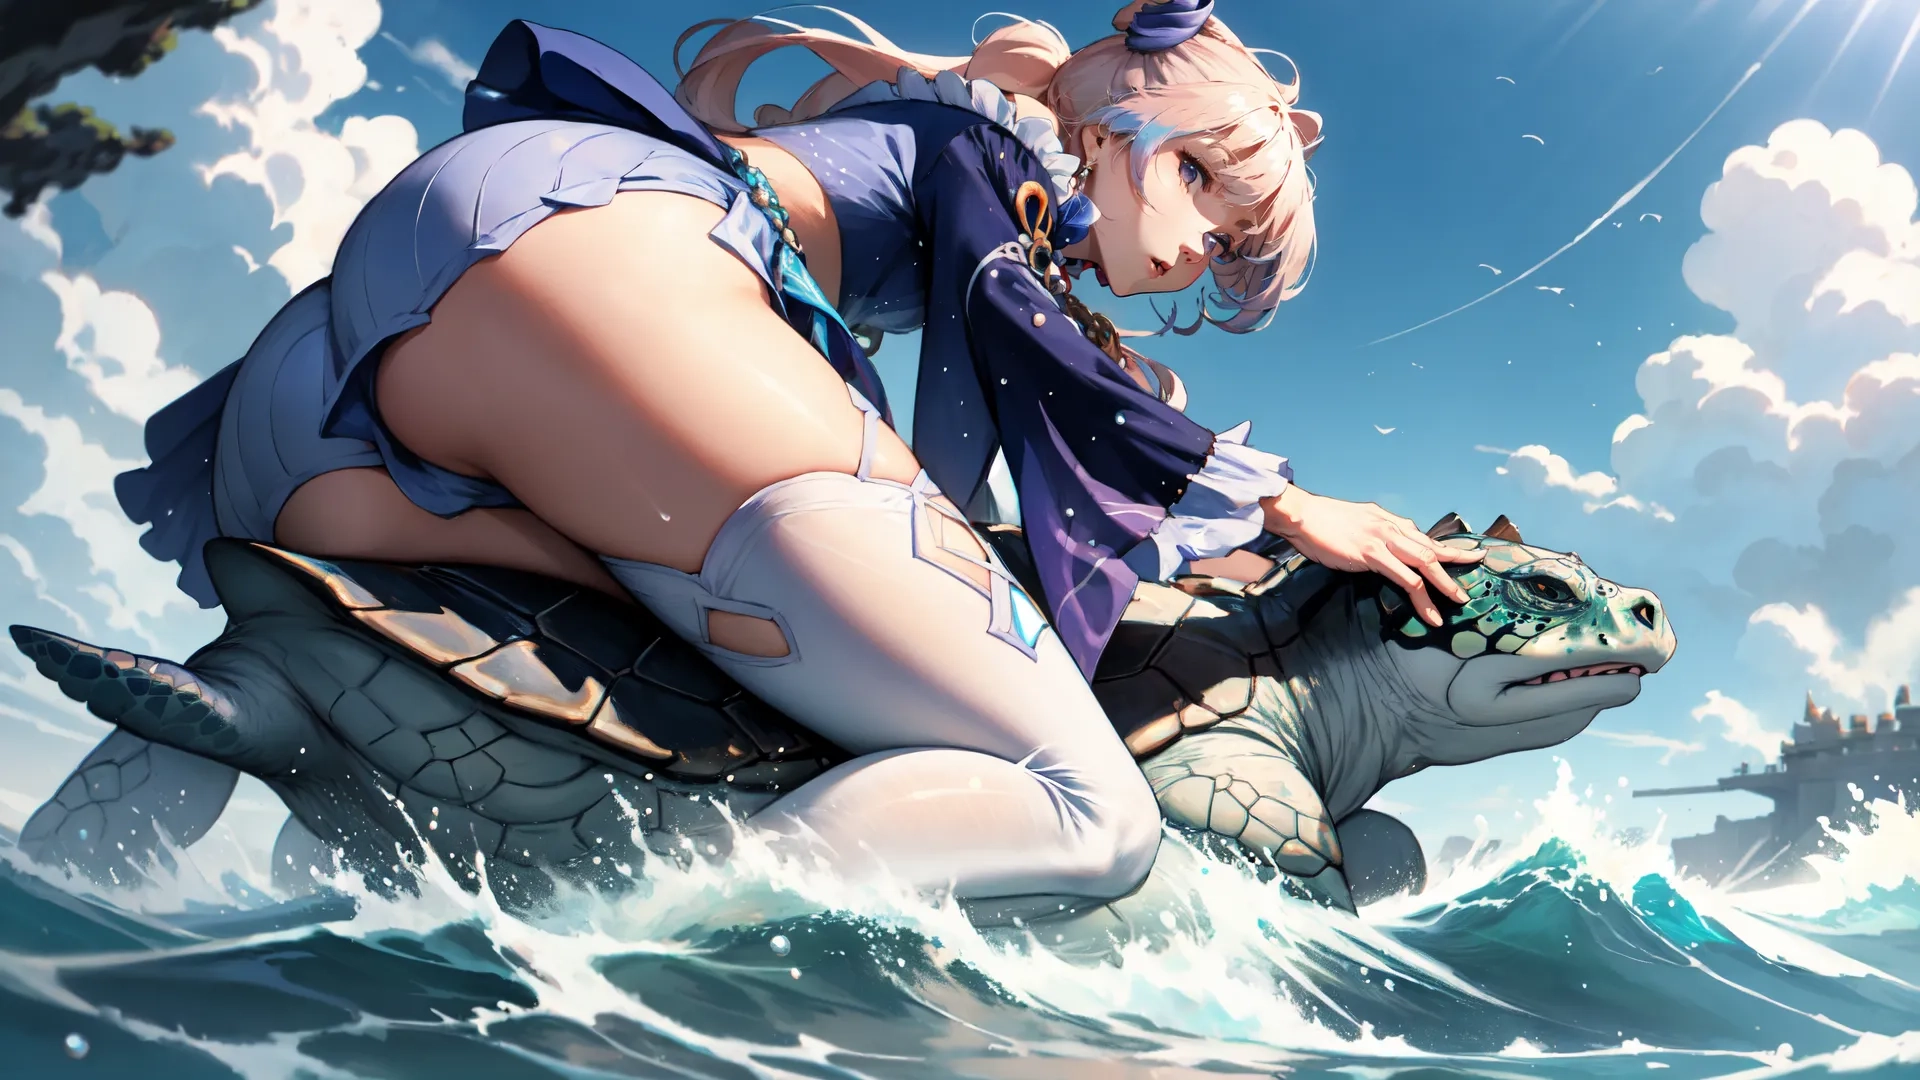 a naked girl riding the back of a large turtle while holding a fishing boat underwater through waves in front of them in an anime like environment
